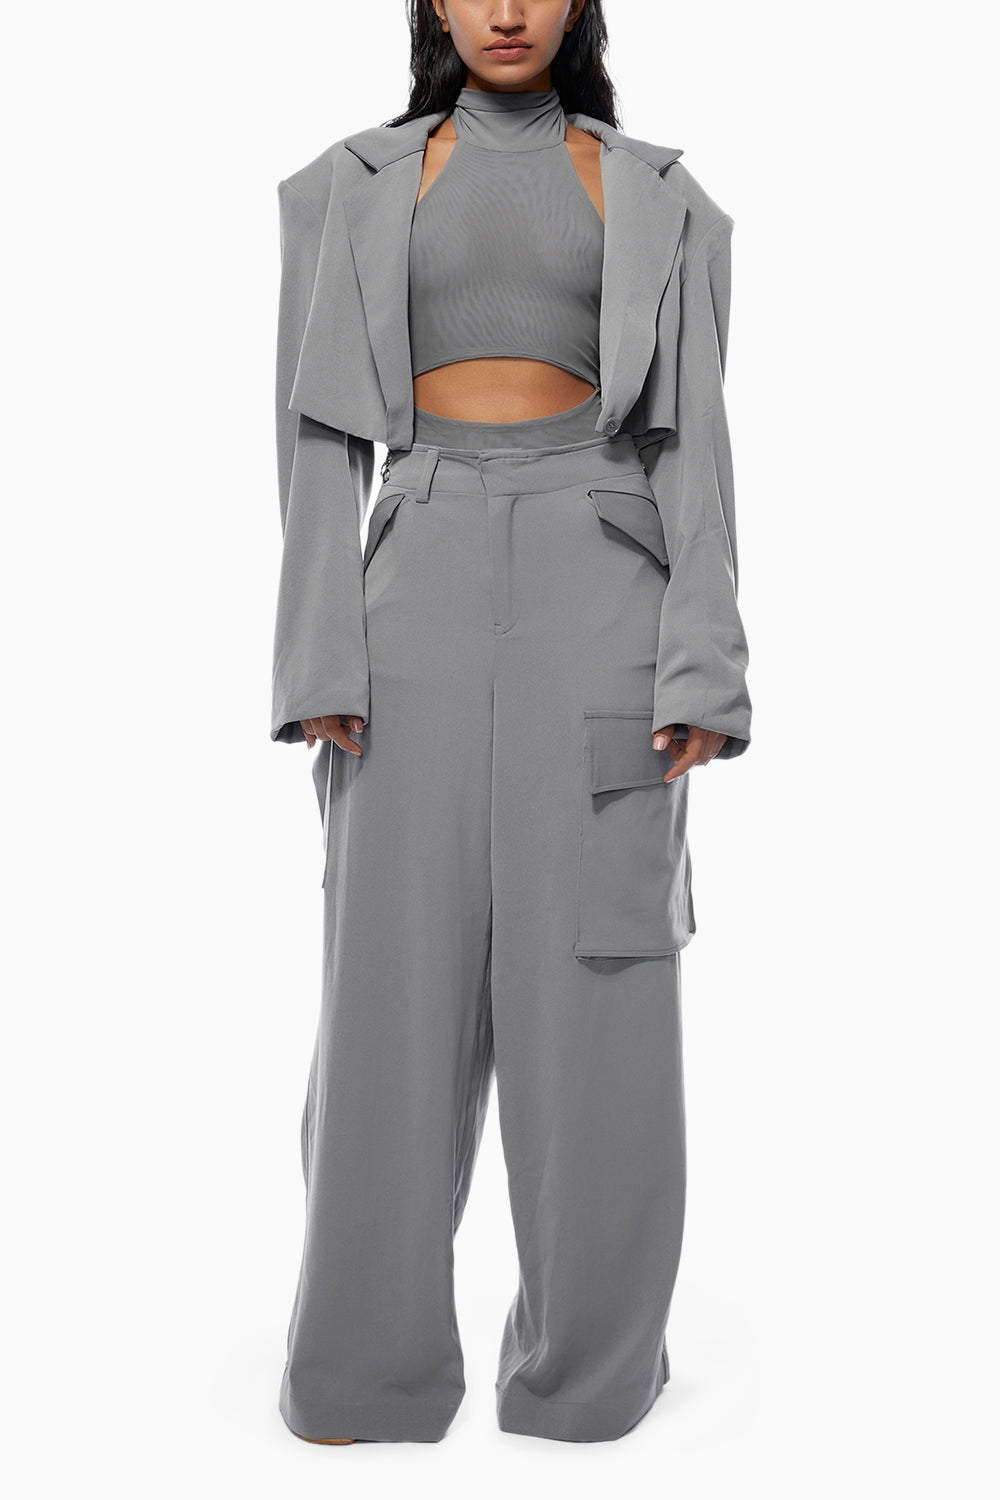 Bodysuit With Pants And Jacket